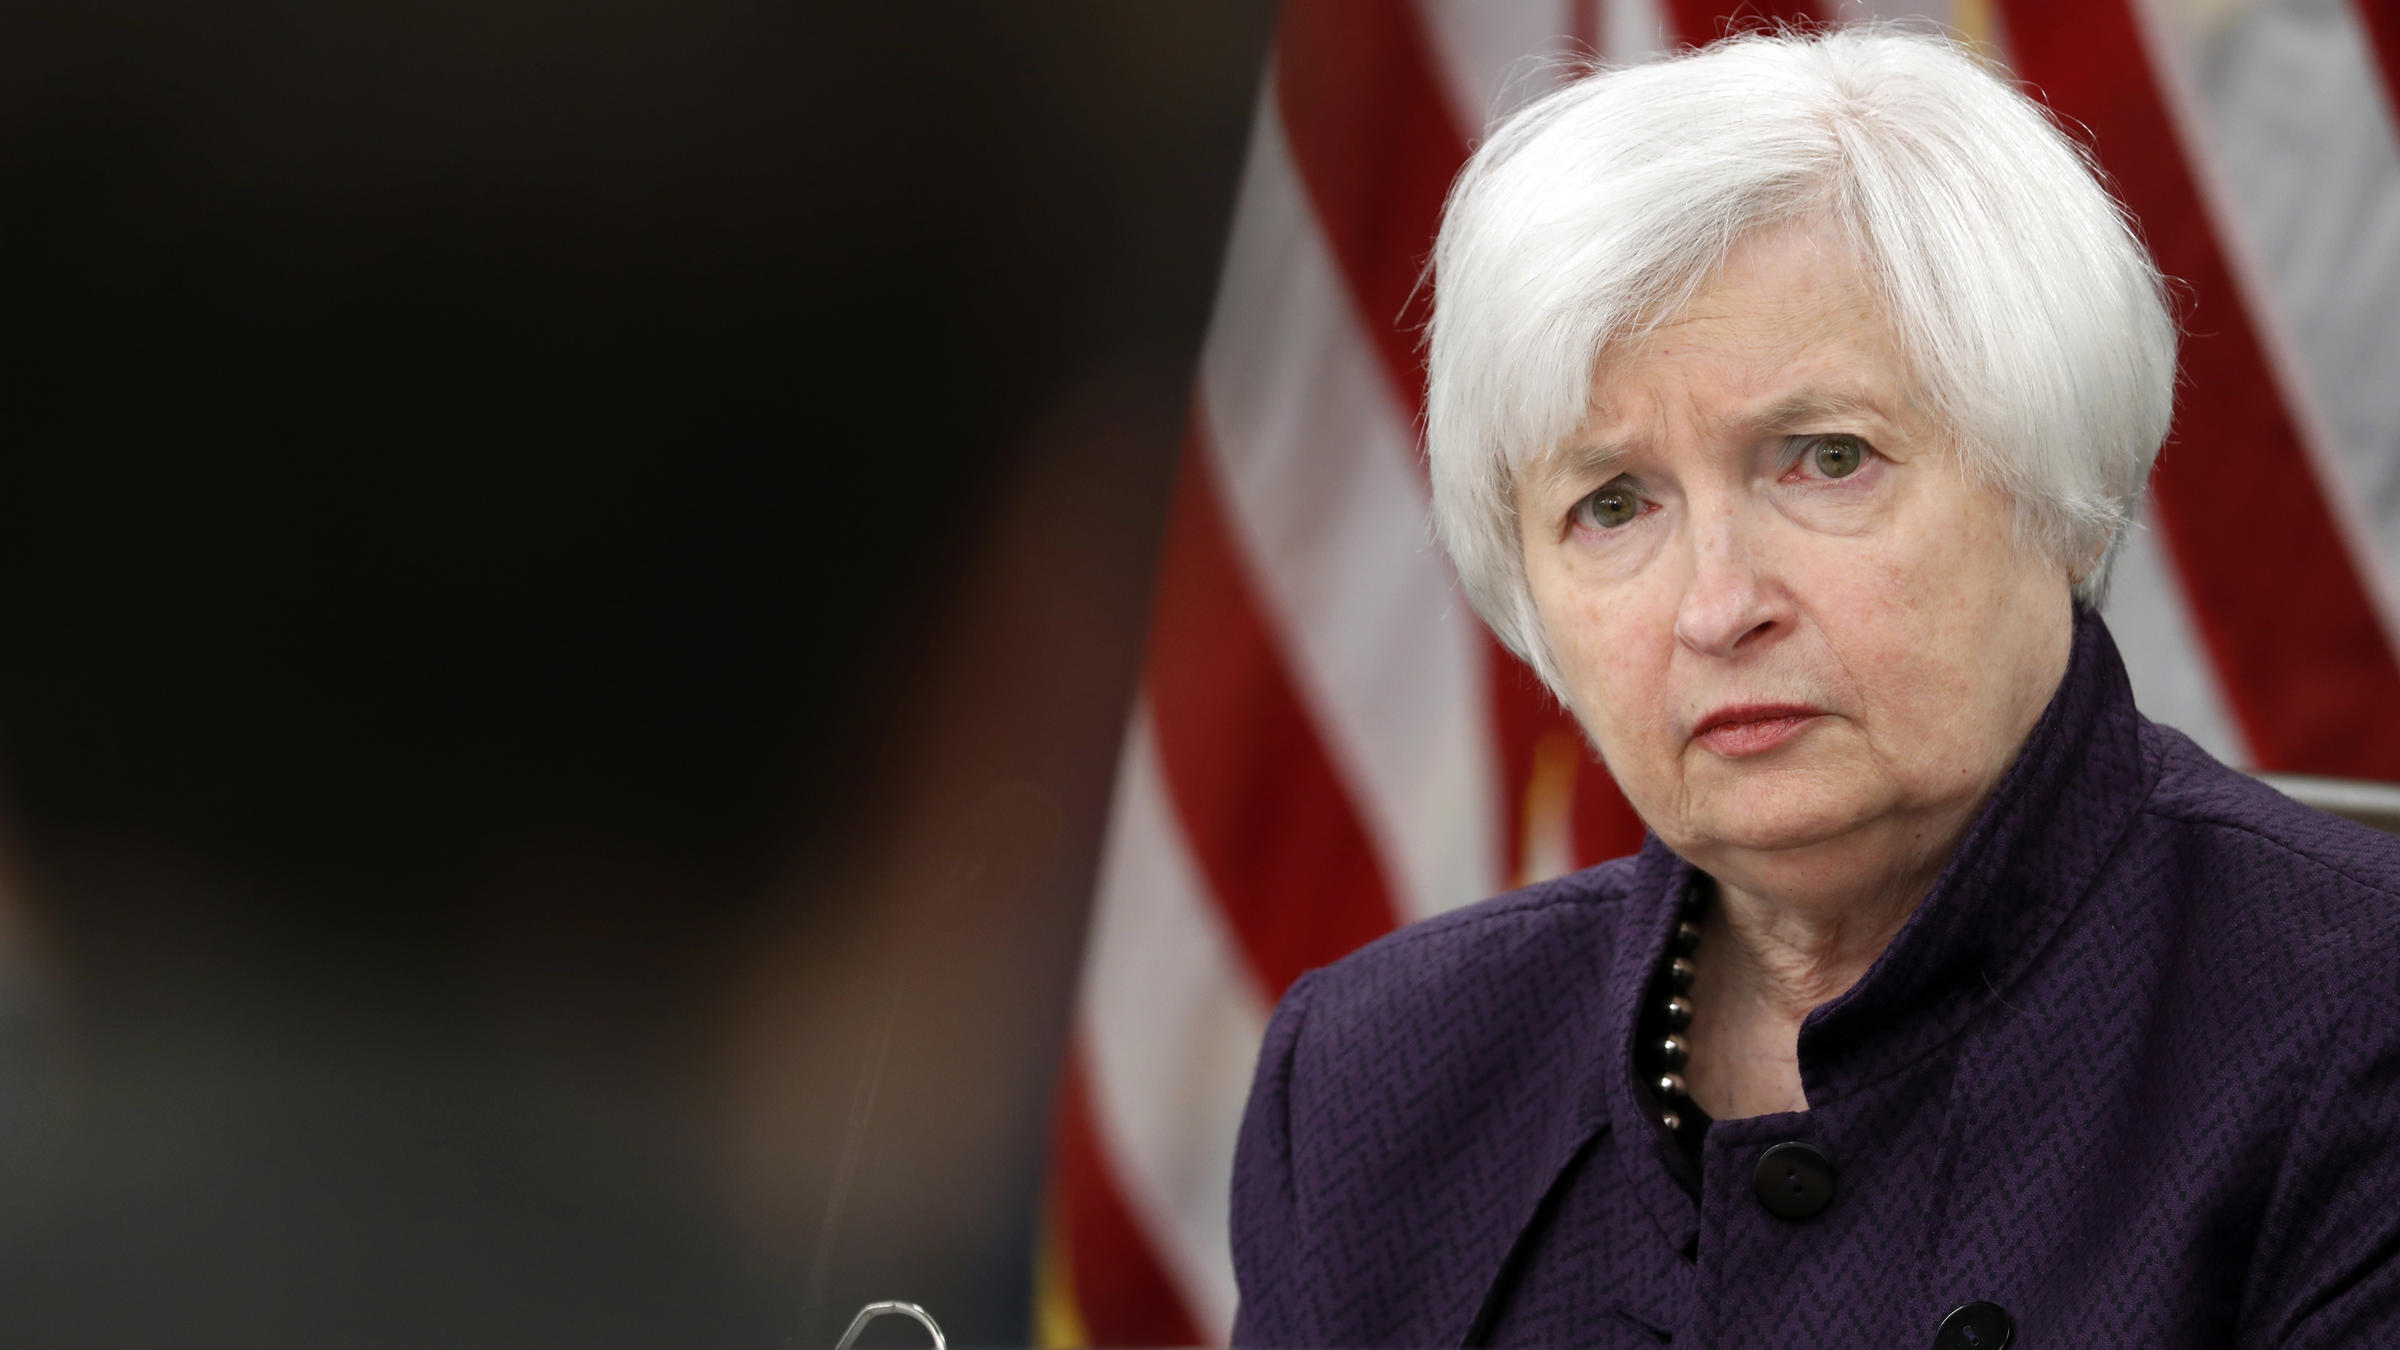 Fed keeps rates steady, signals one hike by end of year